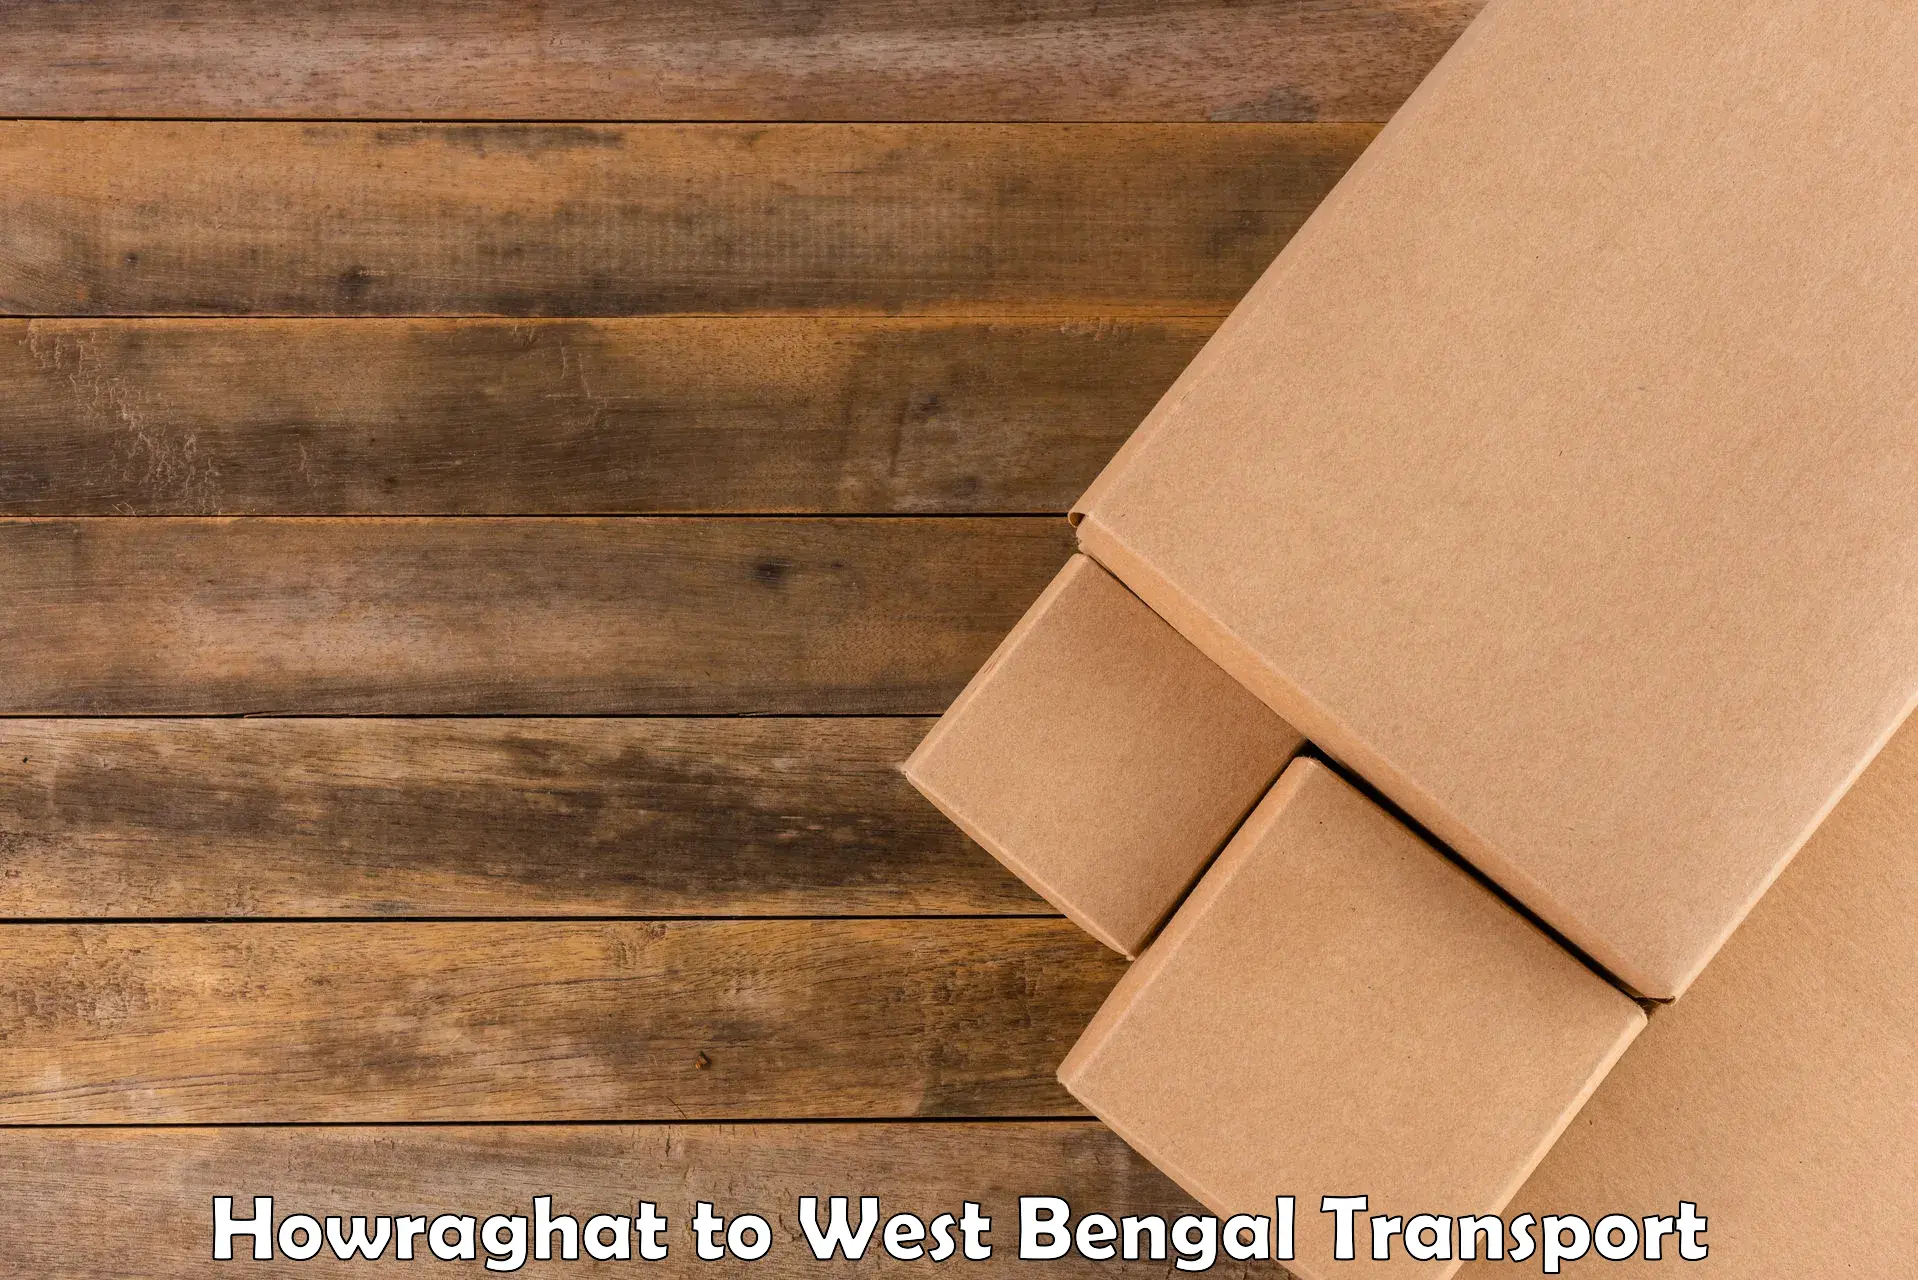 Land transport services Howraghat to Naihati